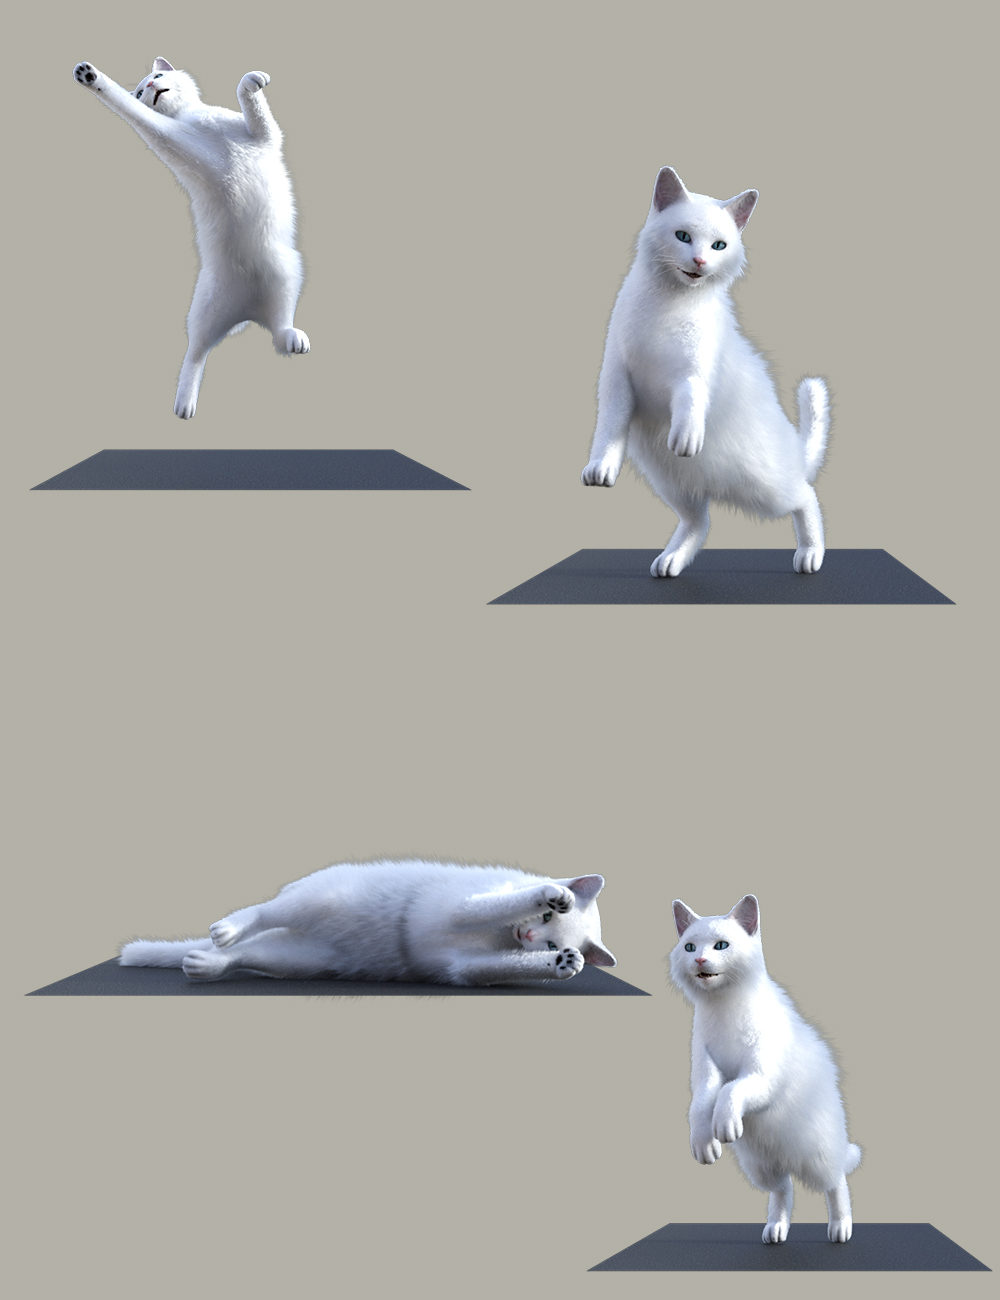 Kitty Cat Poses for Daz House Cat by: Ensary, 3D Models by Daz 3D